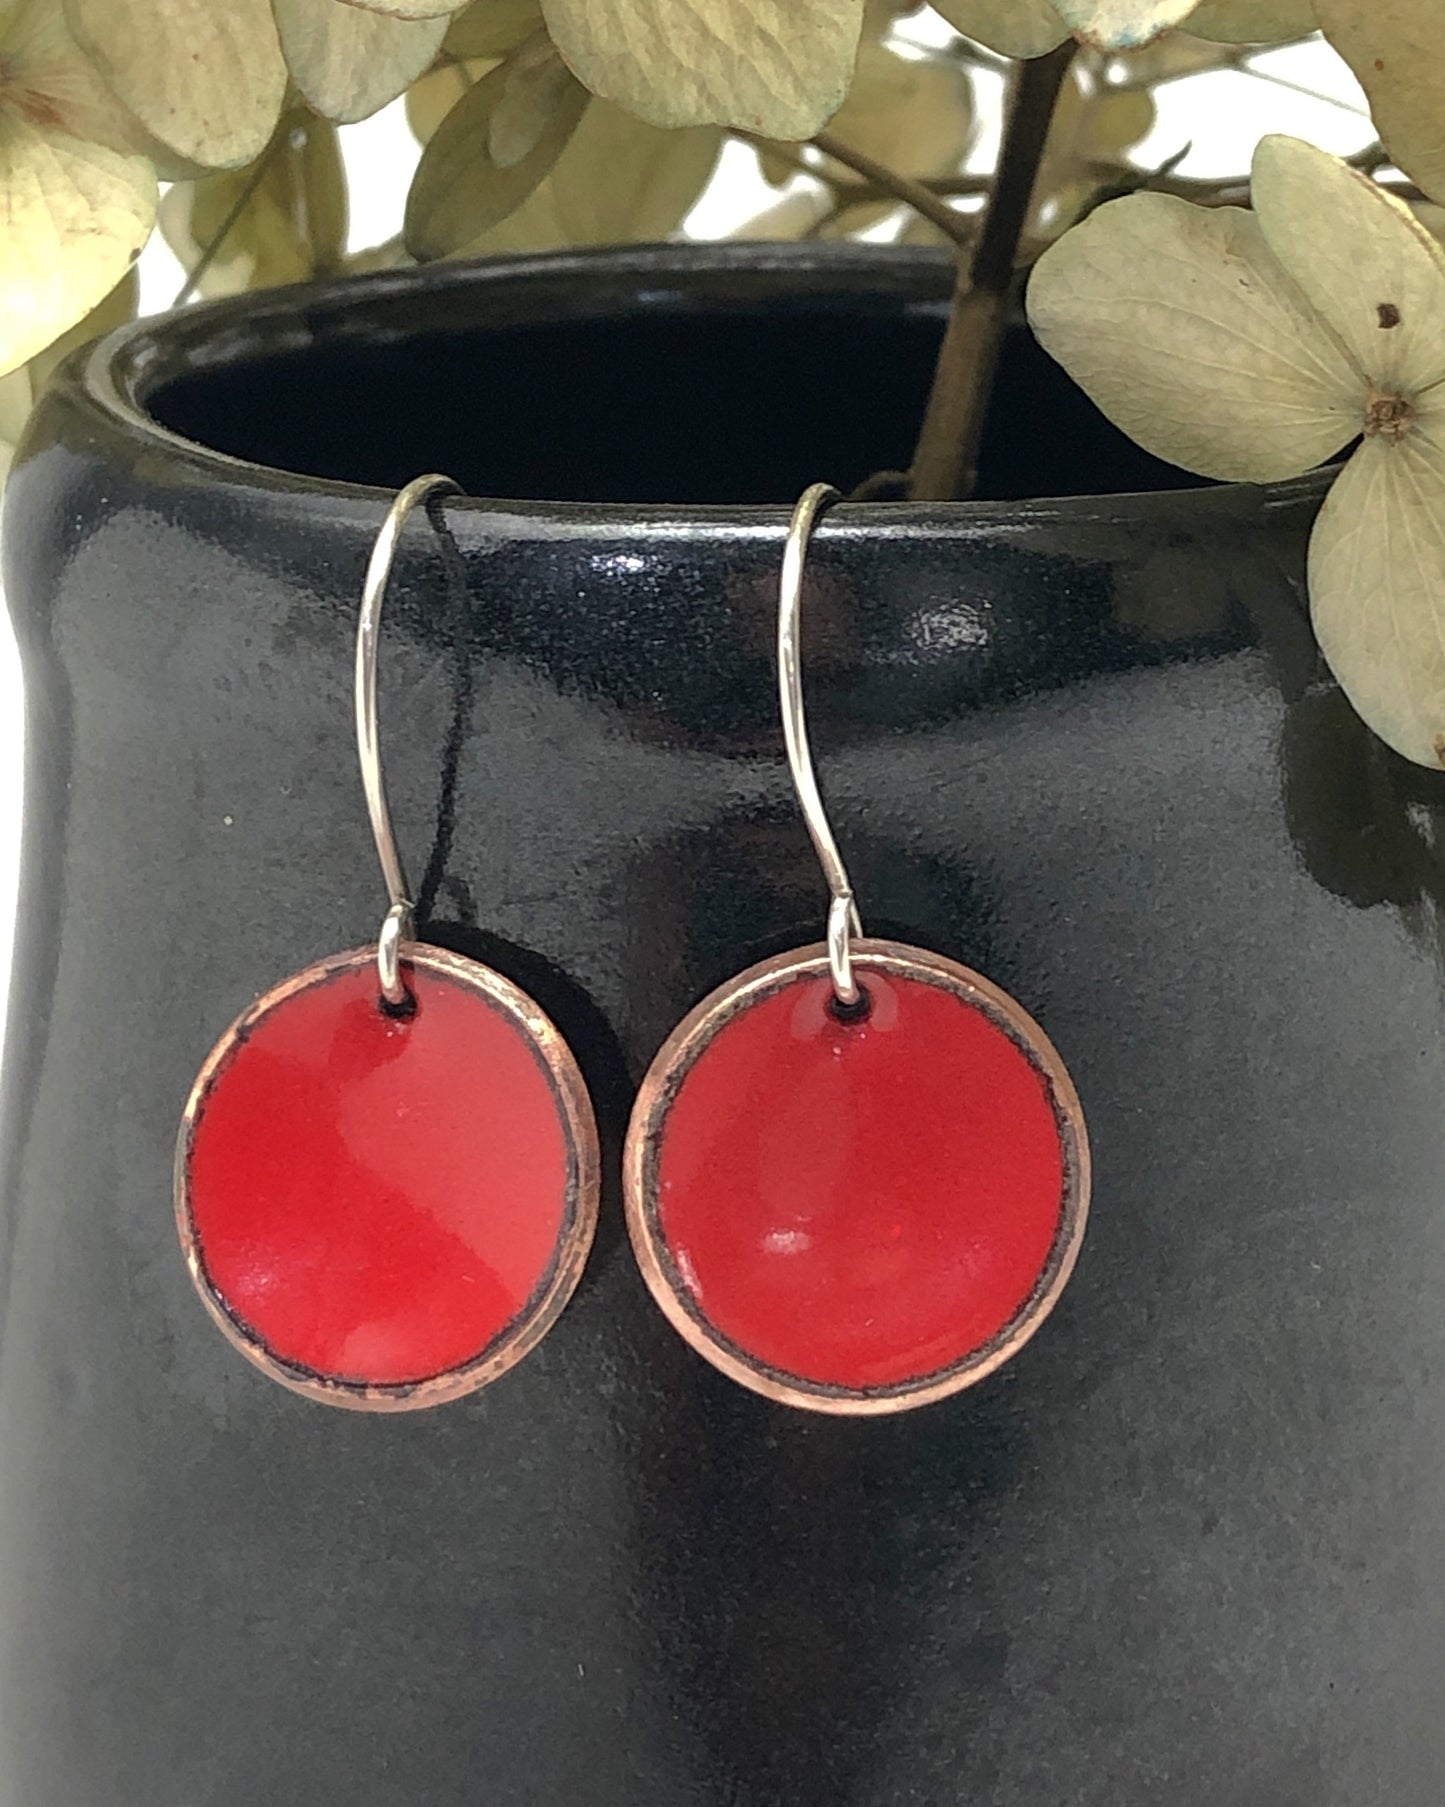 a close up of a pair of red earrings